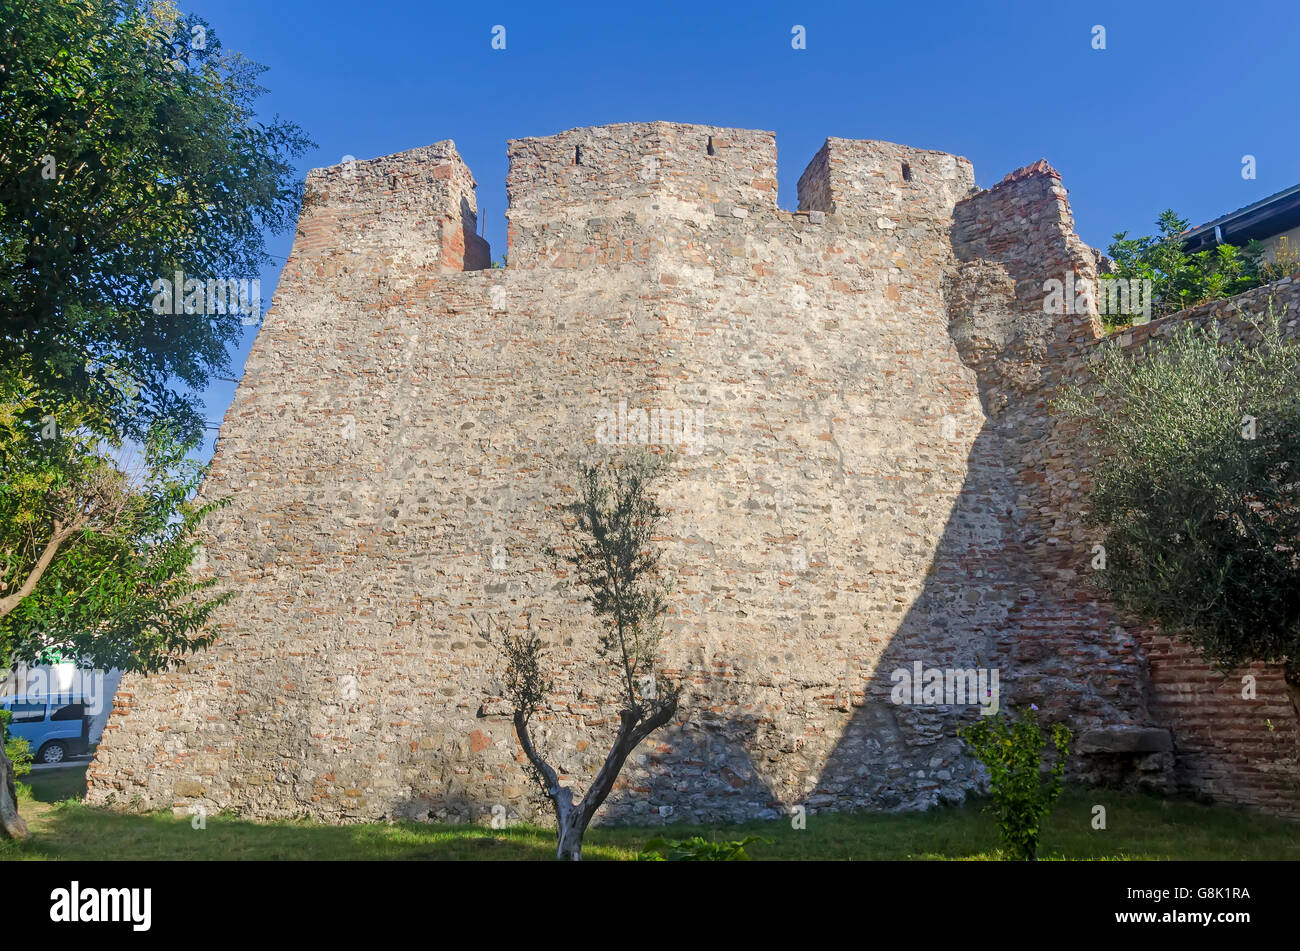 Durres Castle with section of old city wall, Durres Albania Stock Photo